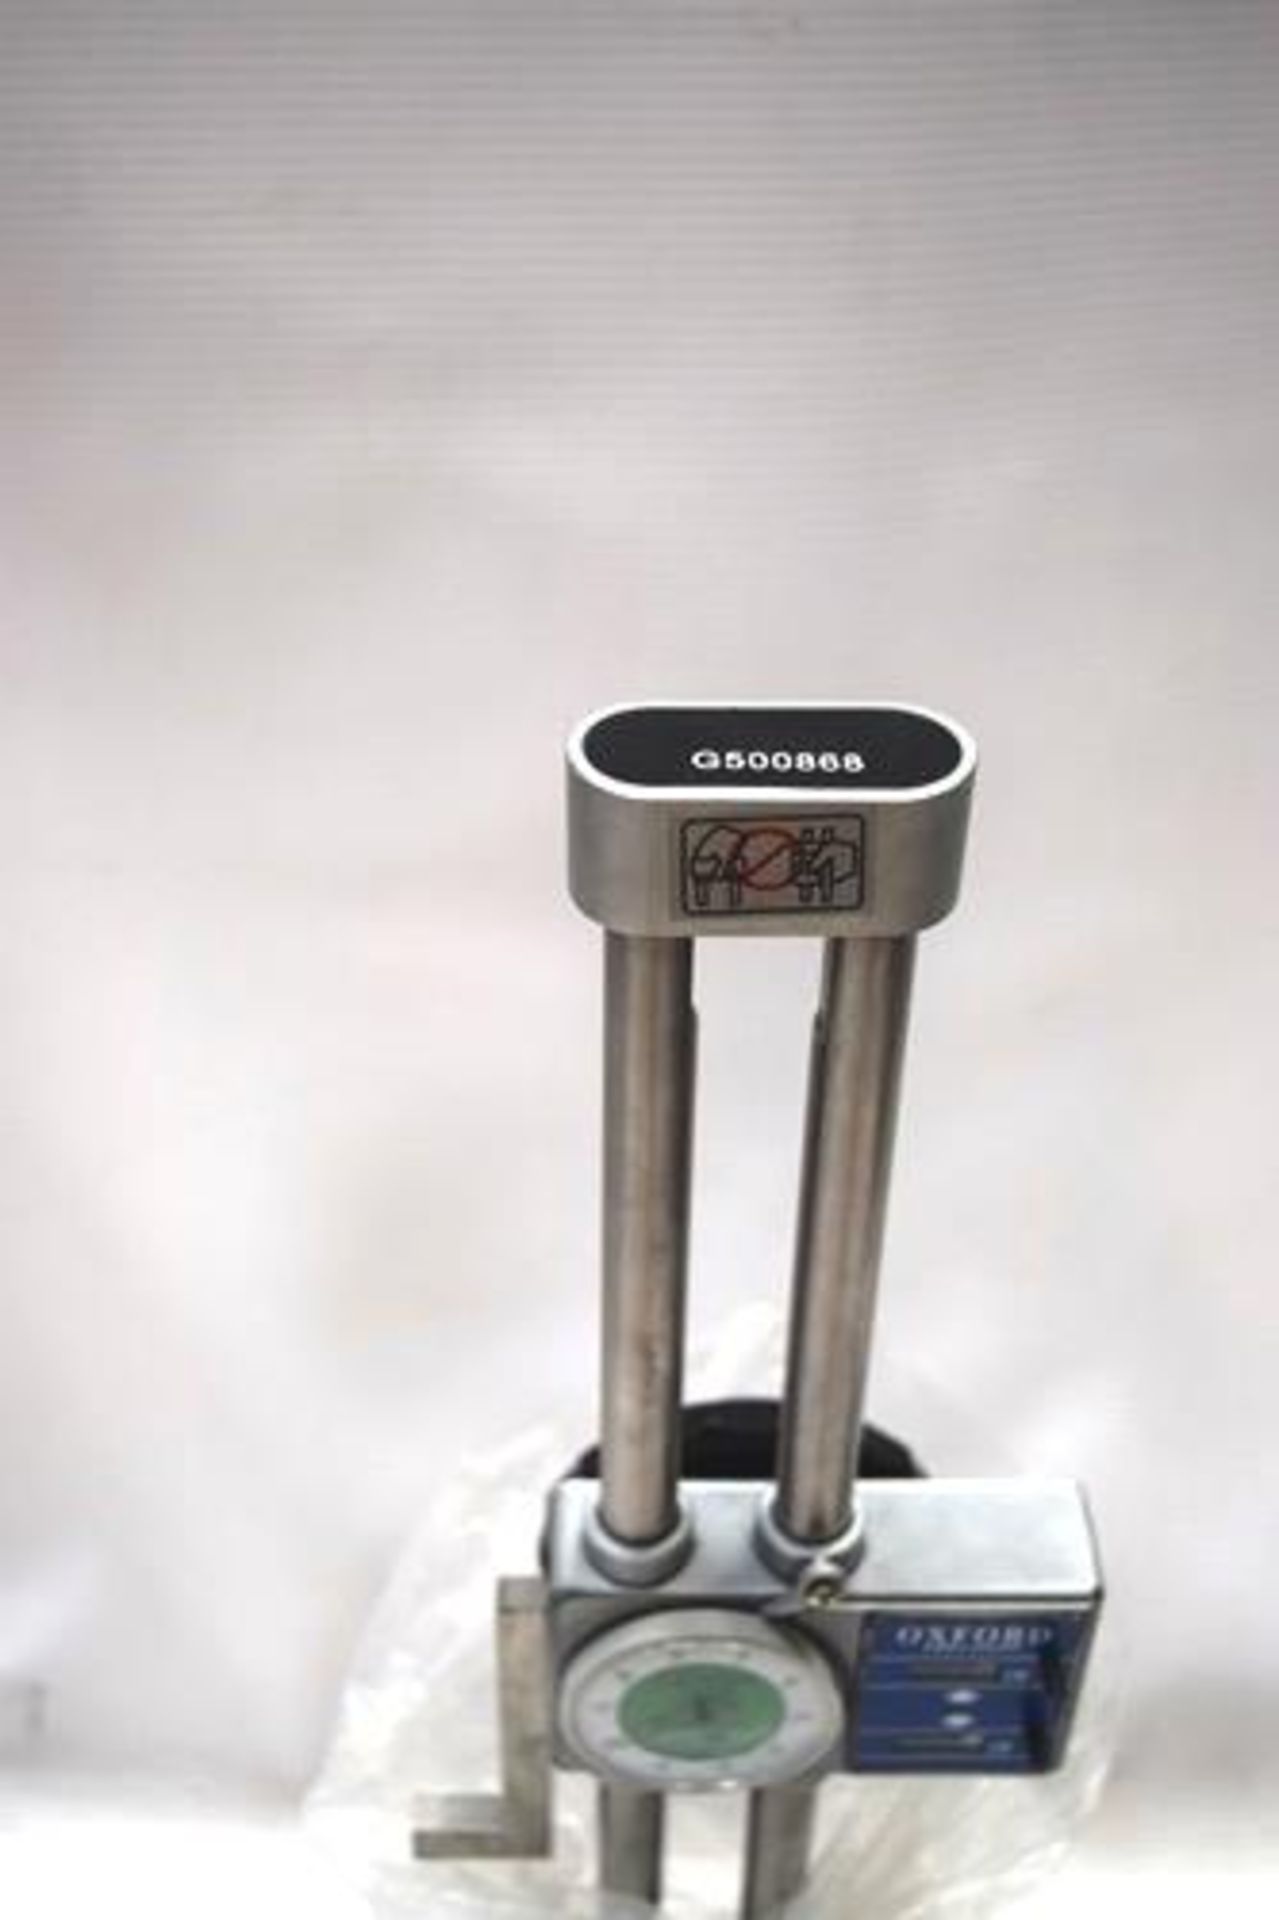 1 x Oxford Precision dual counter height gauge, code G500868, overall 46cm high - New in box, - Image 2 of 2